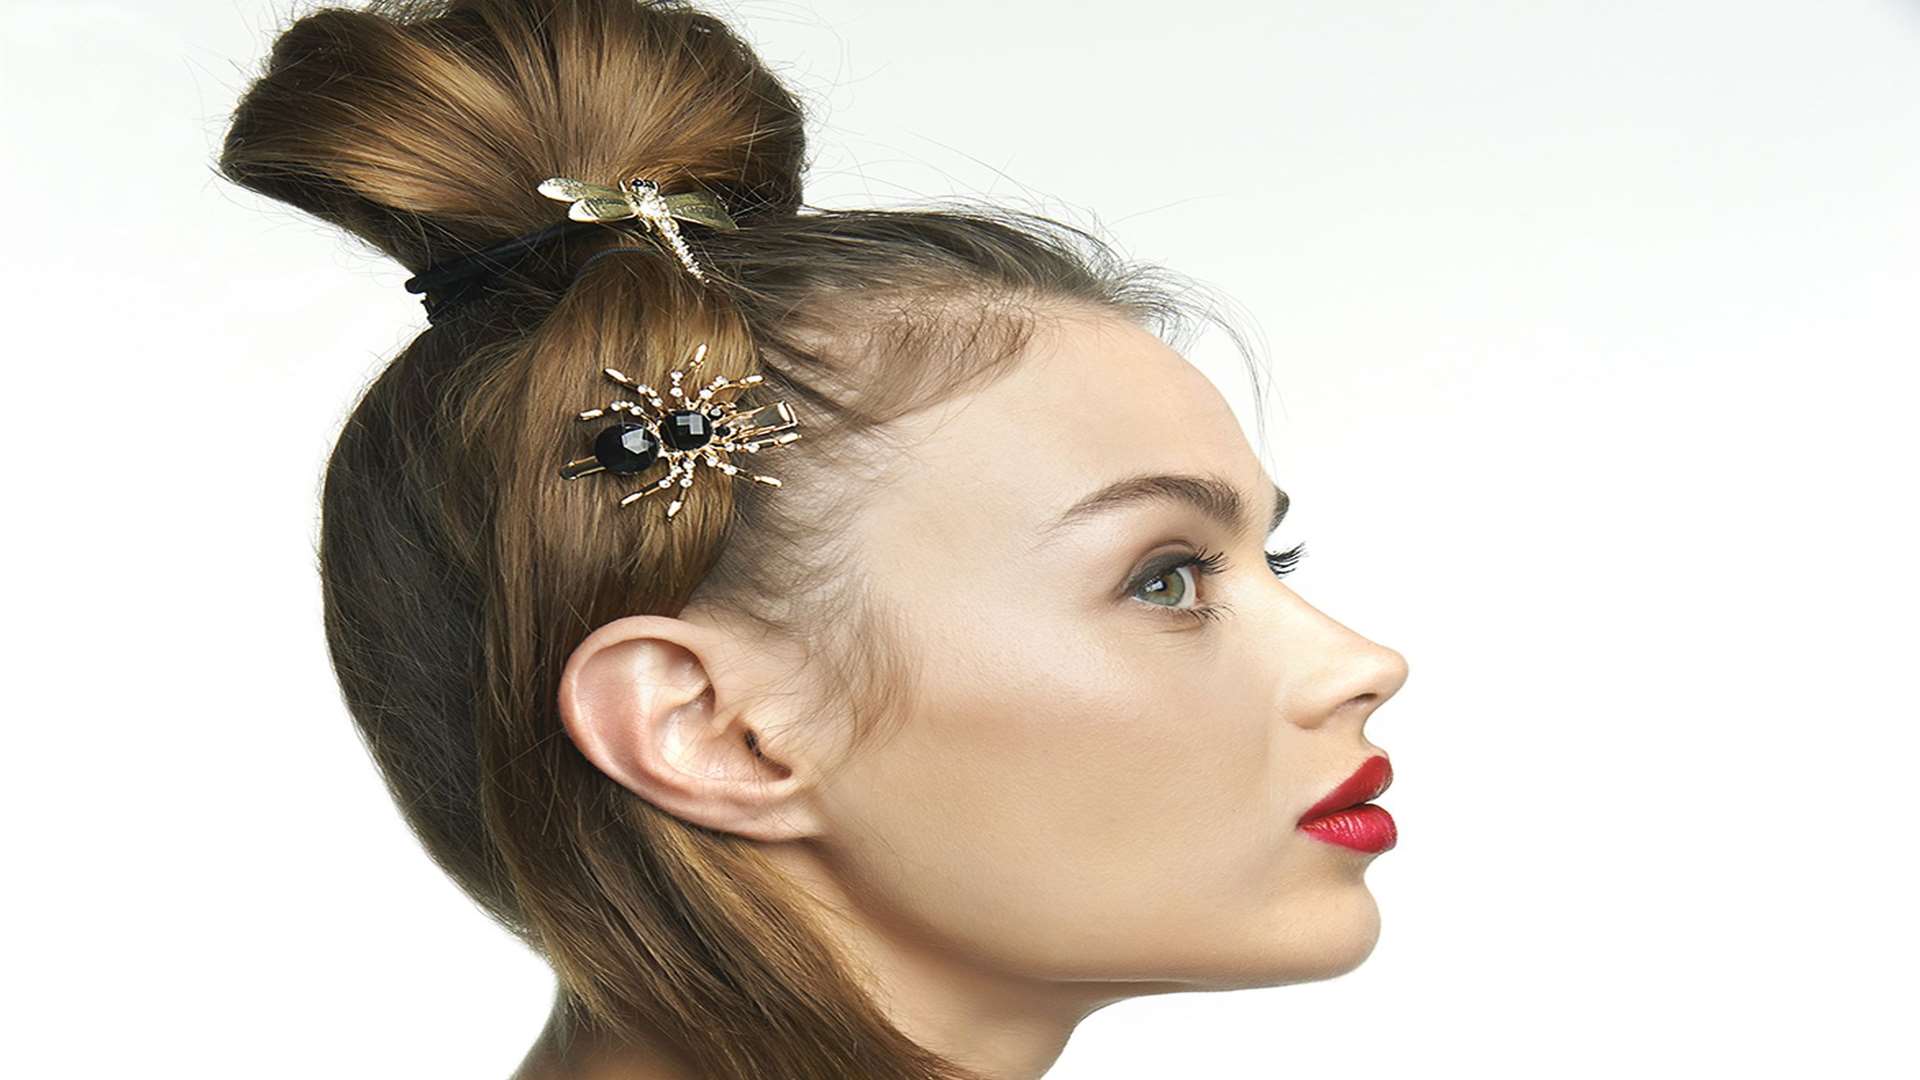 Bling is the new thing when it comes to elevating a plain bun